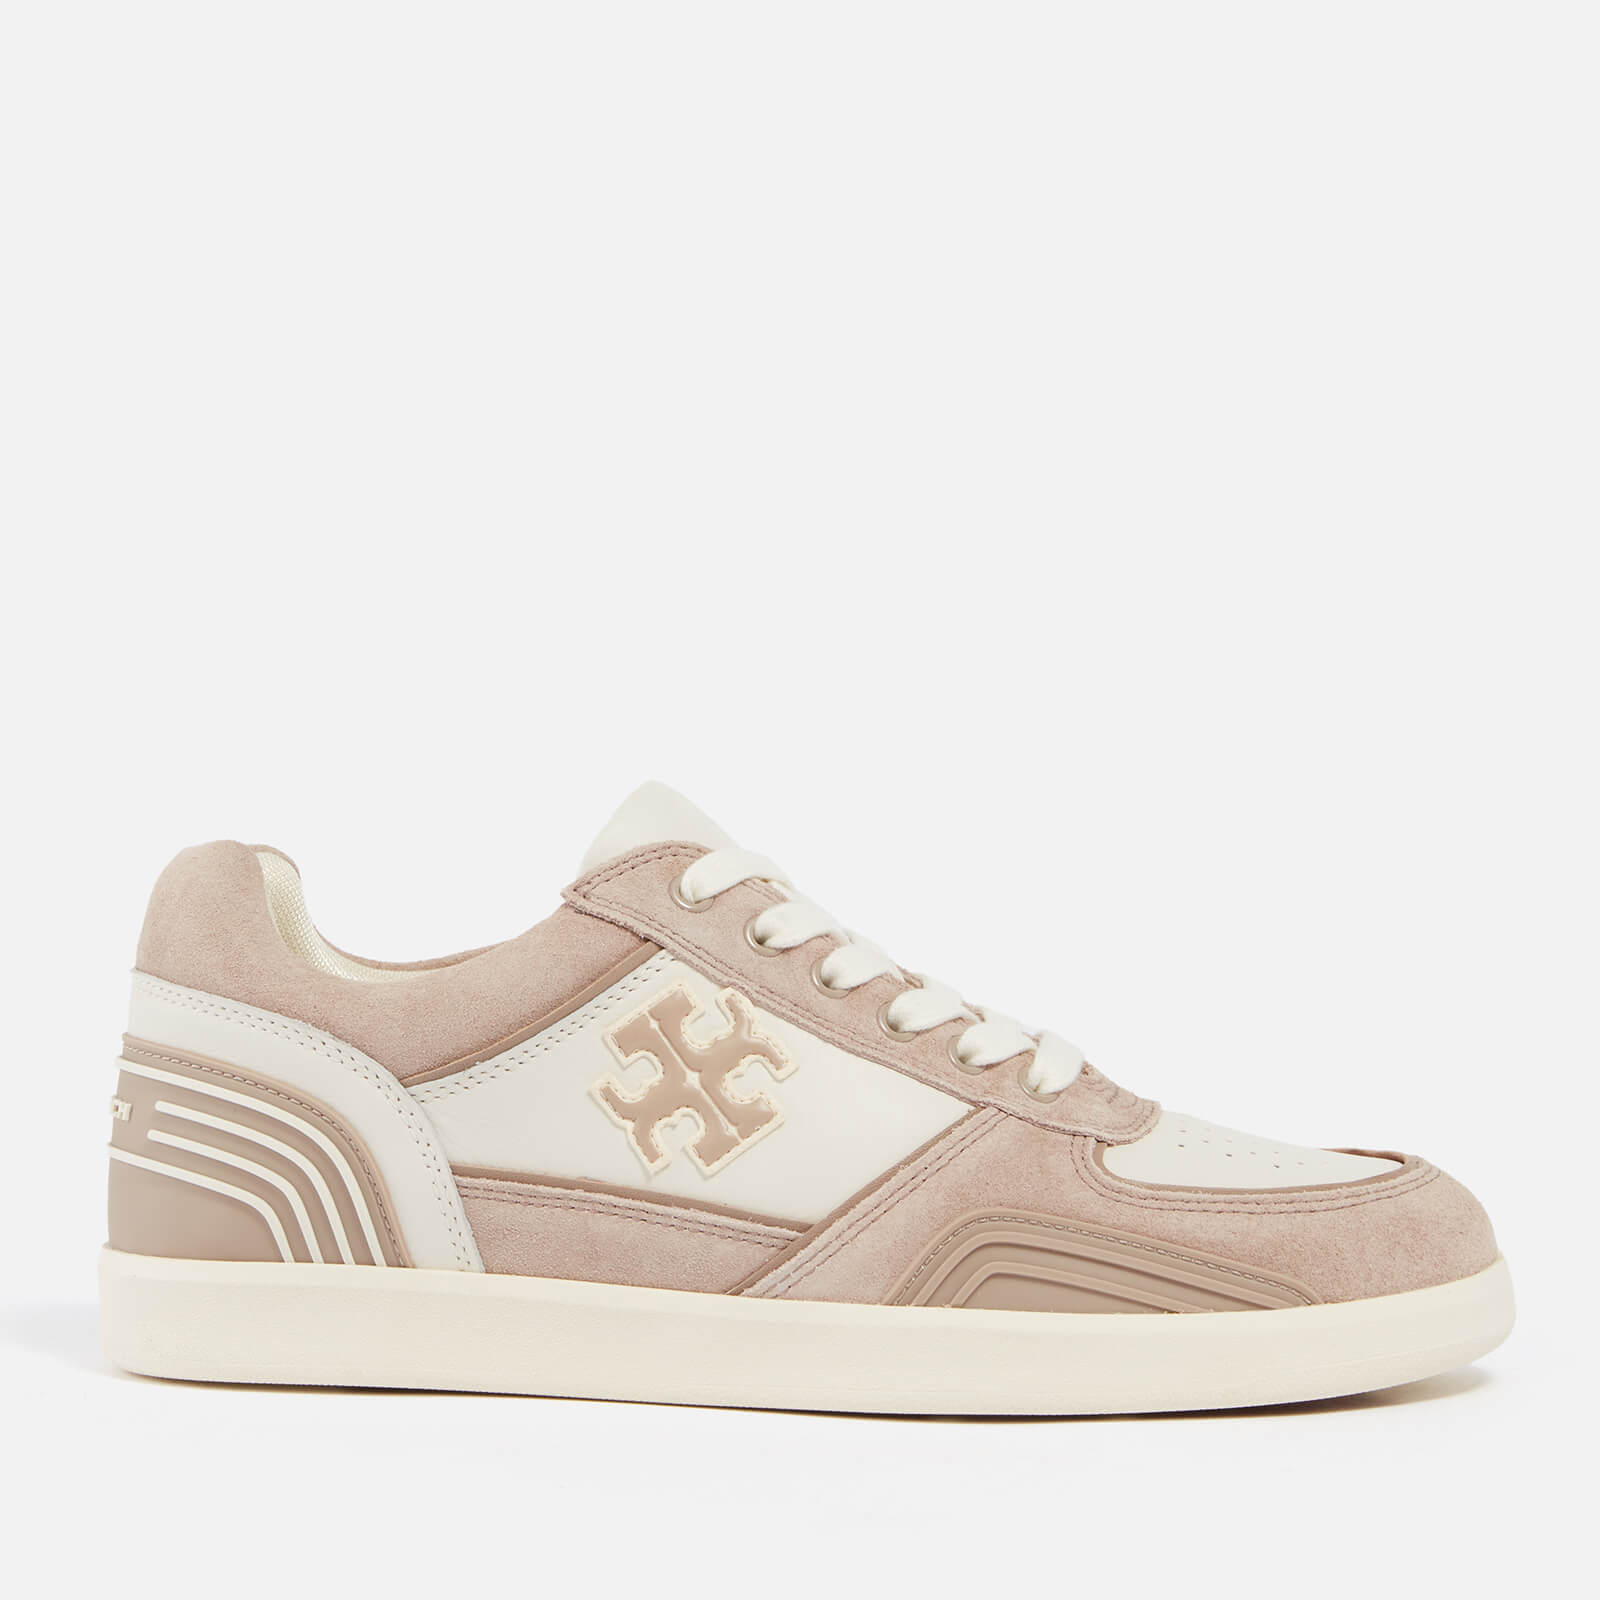 Tory Burch Women’s Clover Leather and Suede Trainers